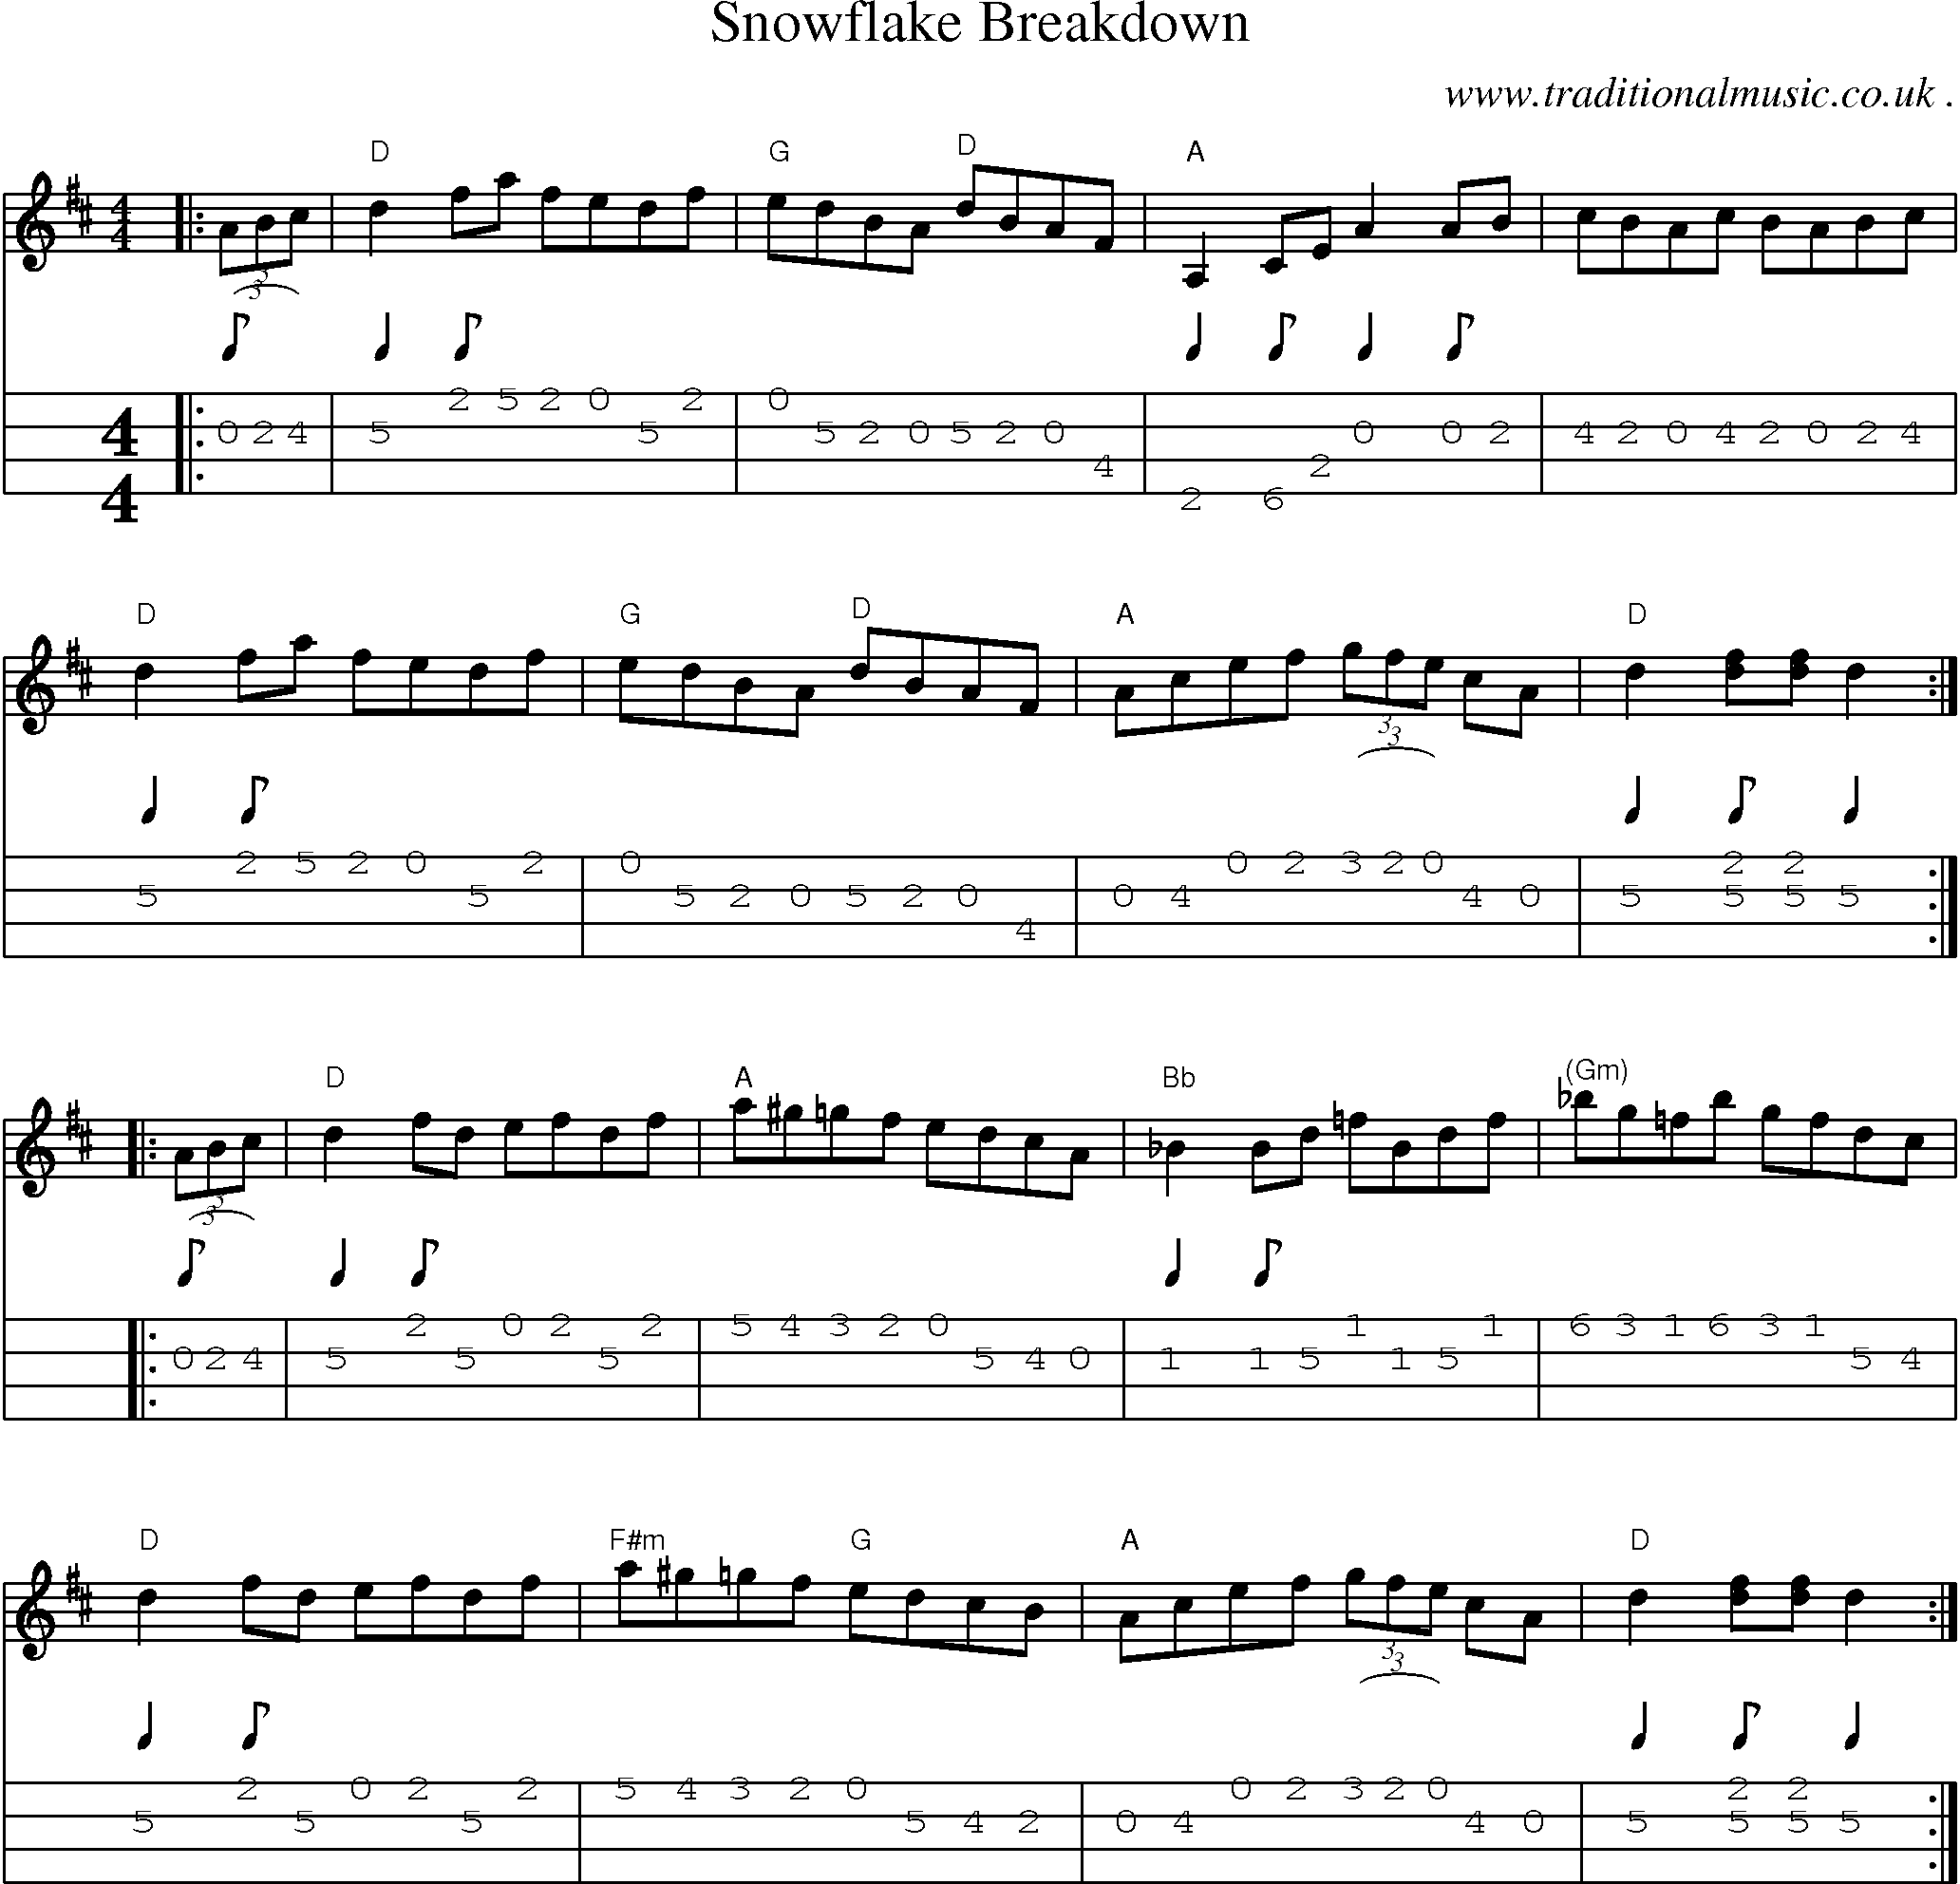 Music Score and Mandolin Tabs for Snowflake Breakdown